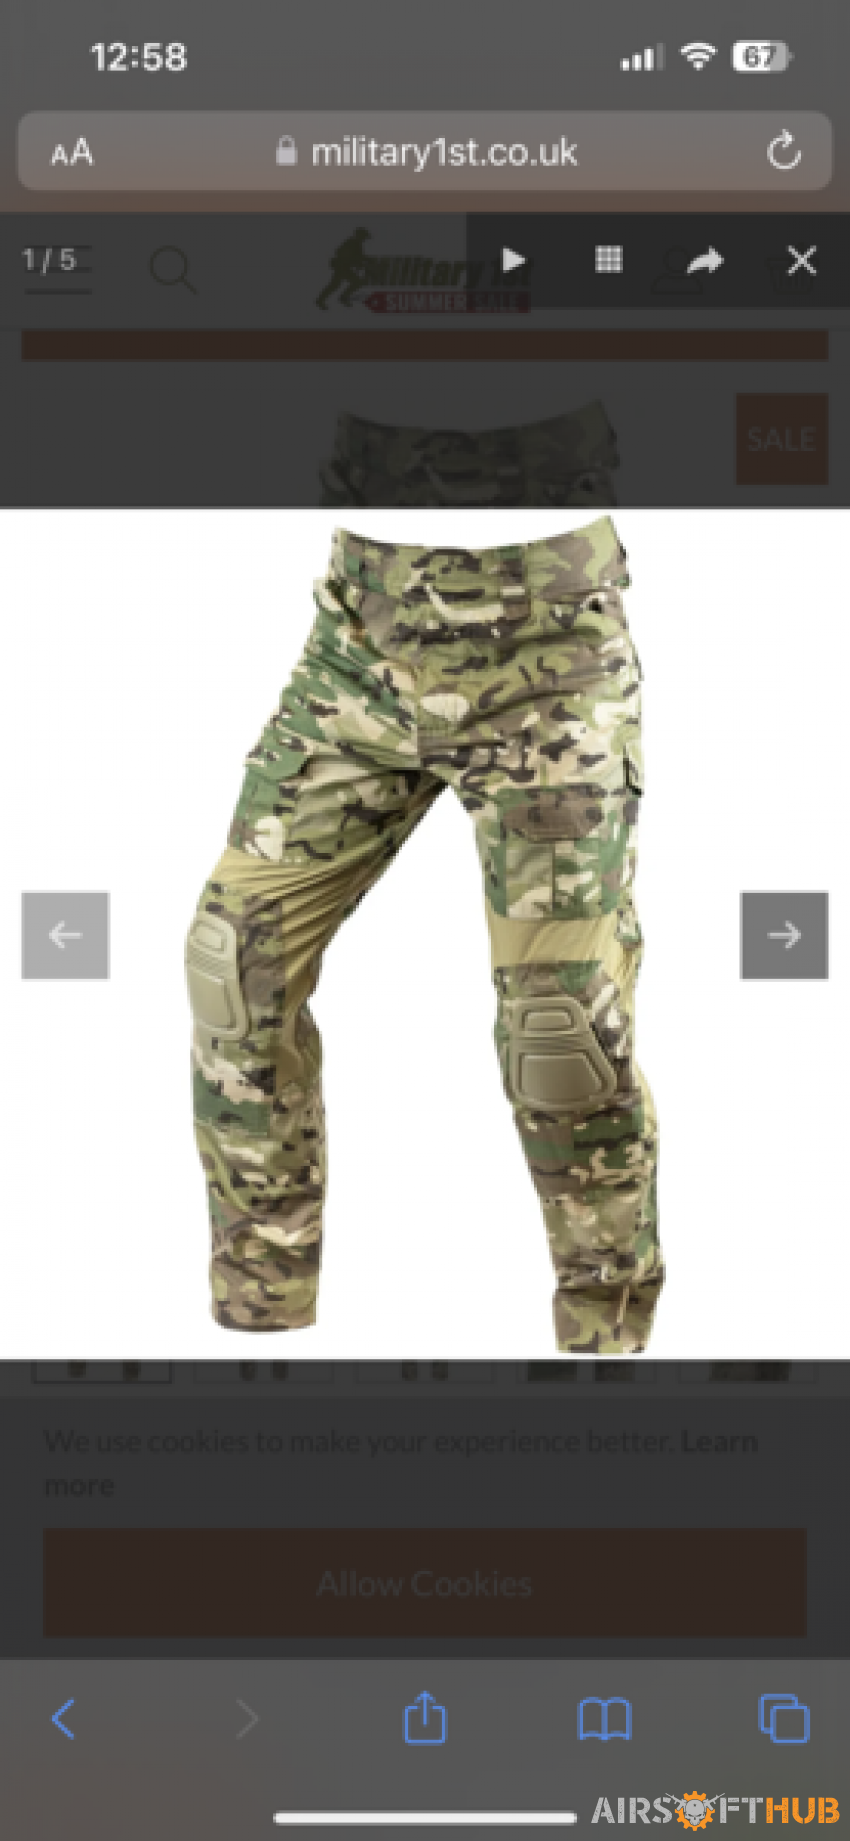 Trousers with knee pads - Used airsoft equipment